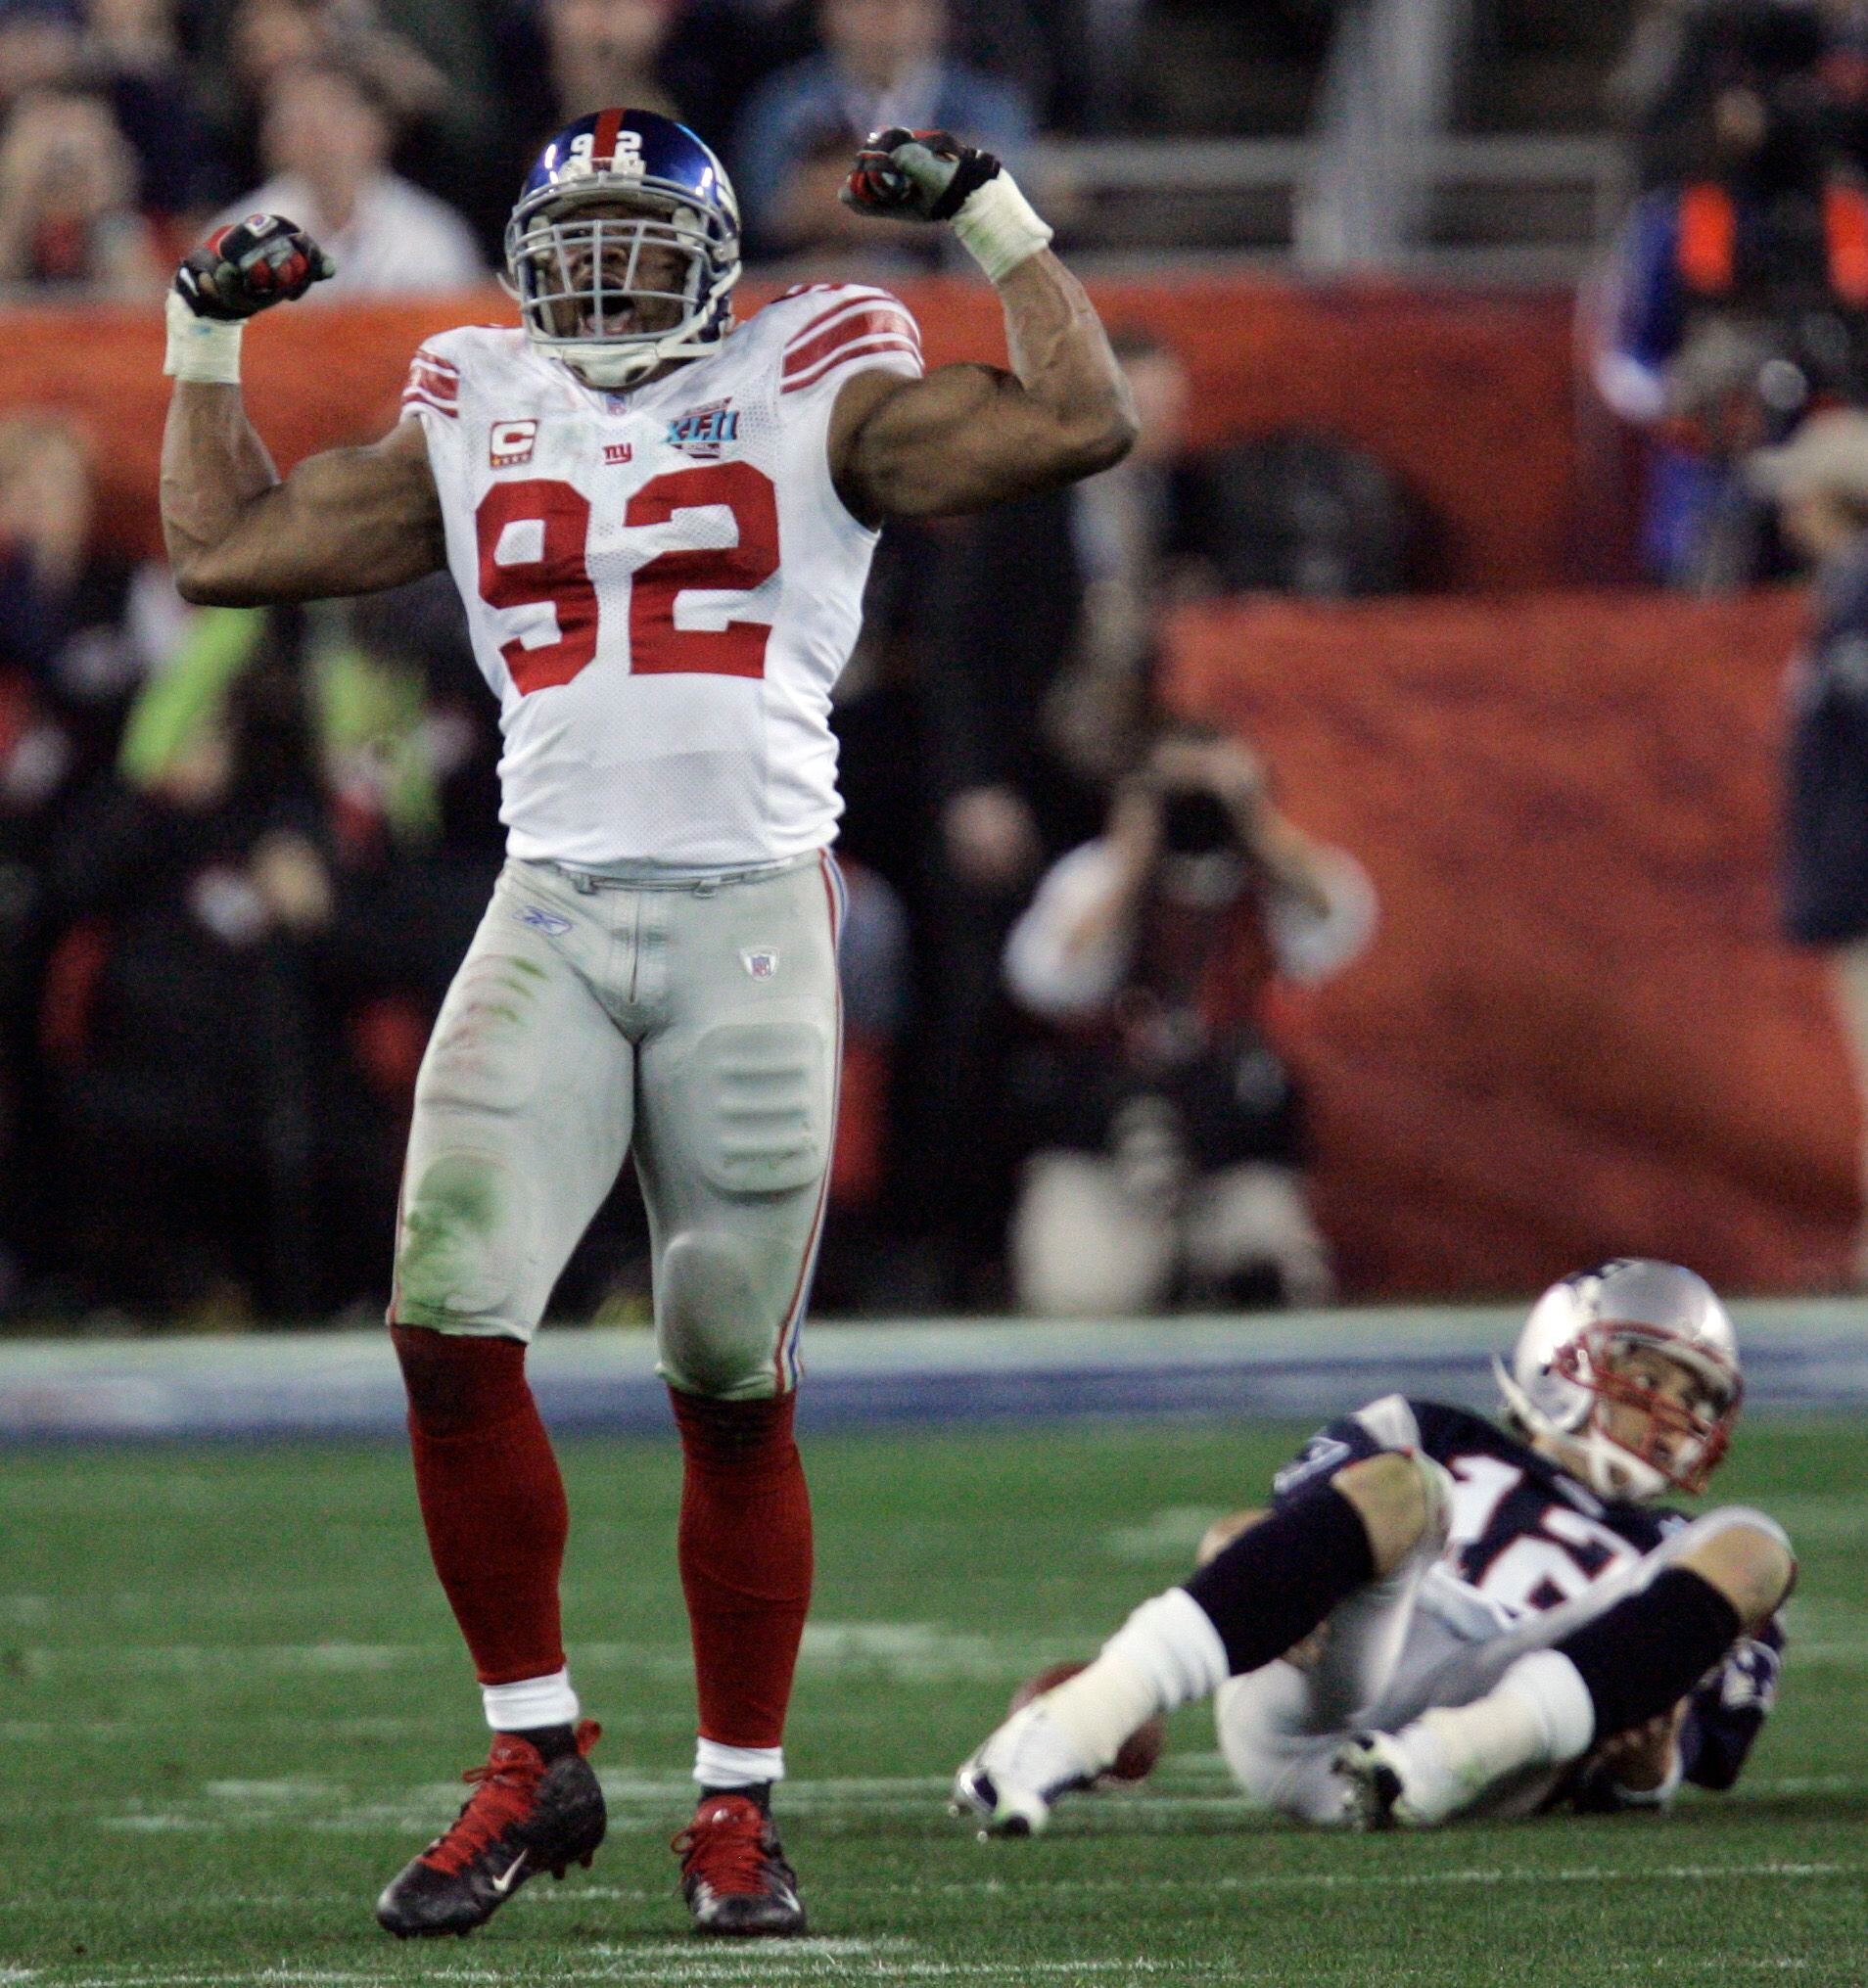 Strahan wonders why Giants took so long to retire 92 jersey